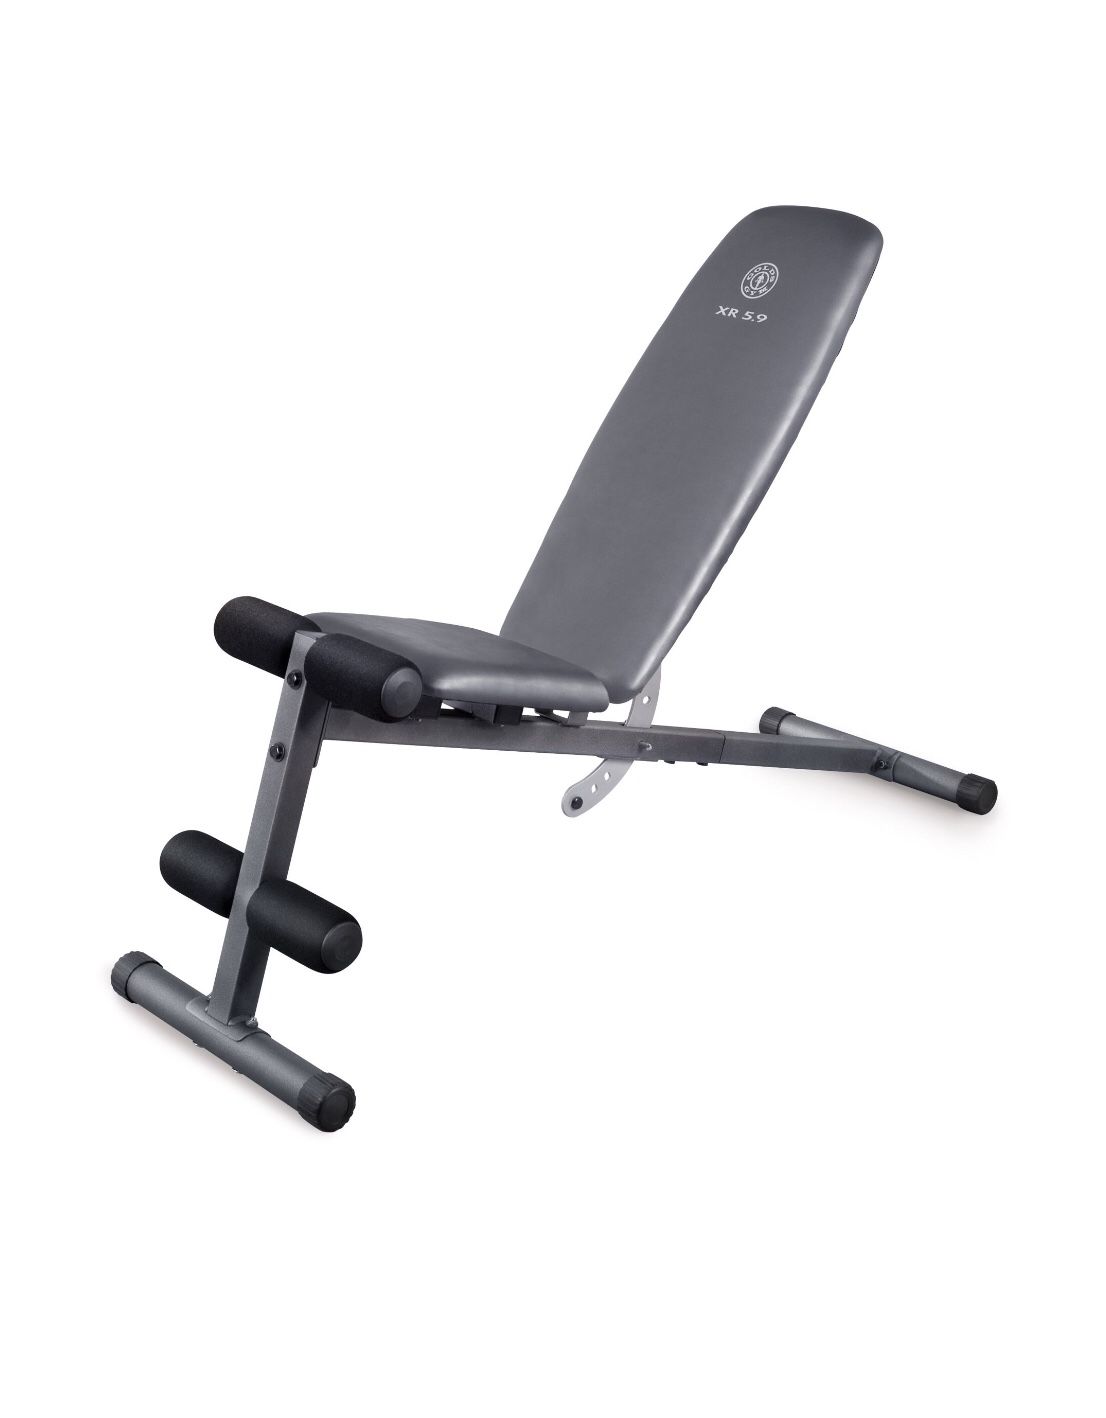 Weider XR 5.9 Adjustable Slant Workout Bench with 4-Roll Leg Lockdown and Exercise Chart